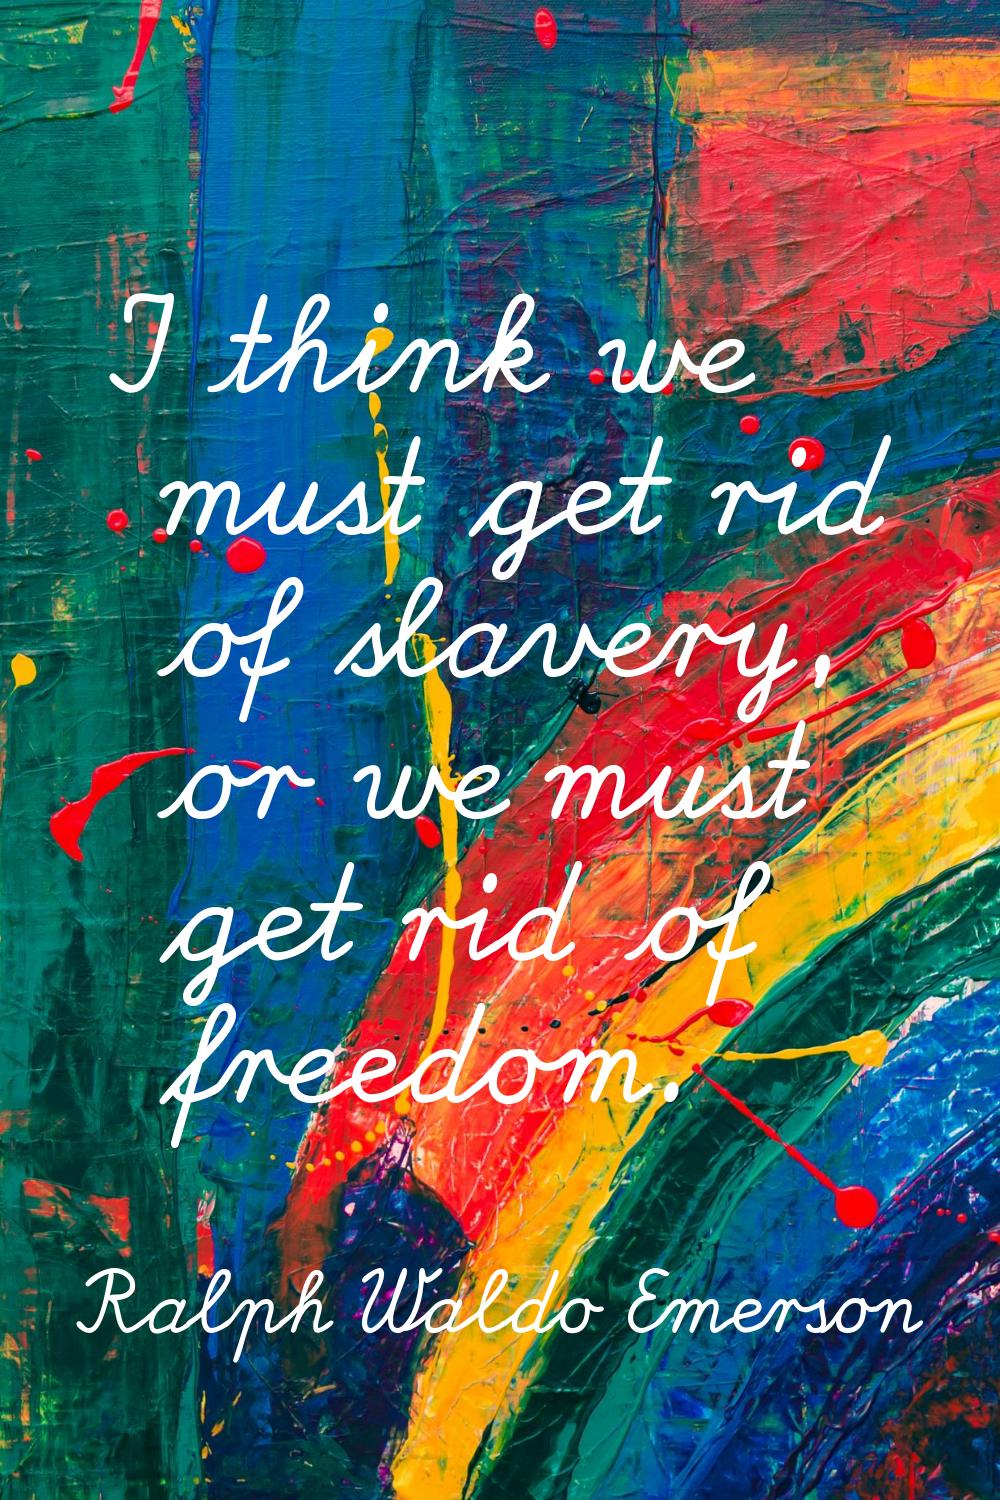 I think we must get rid of slavery, or we must get rid of freedom.